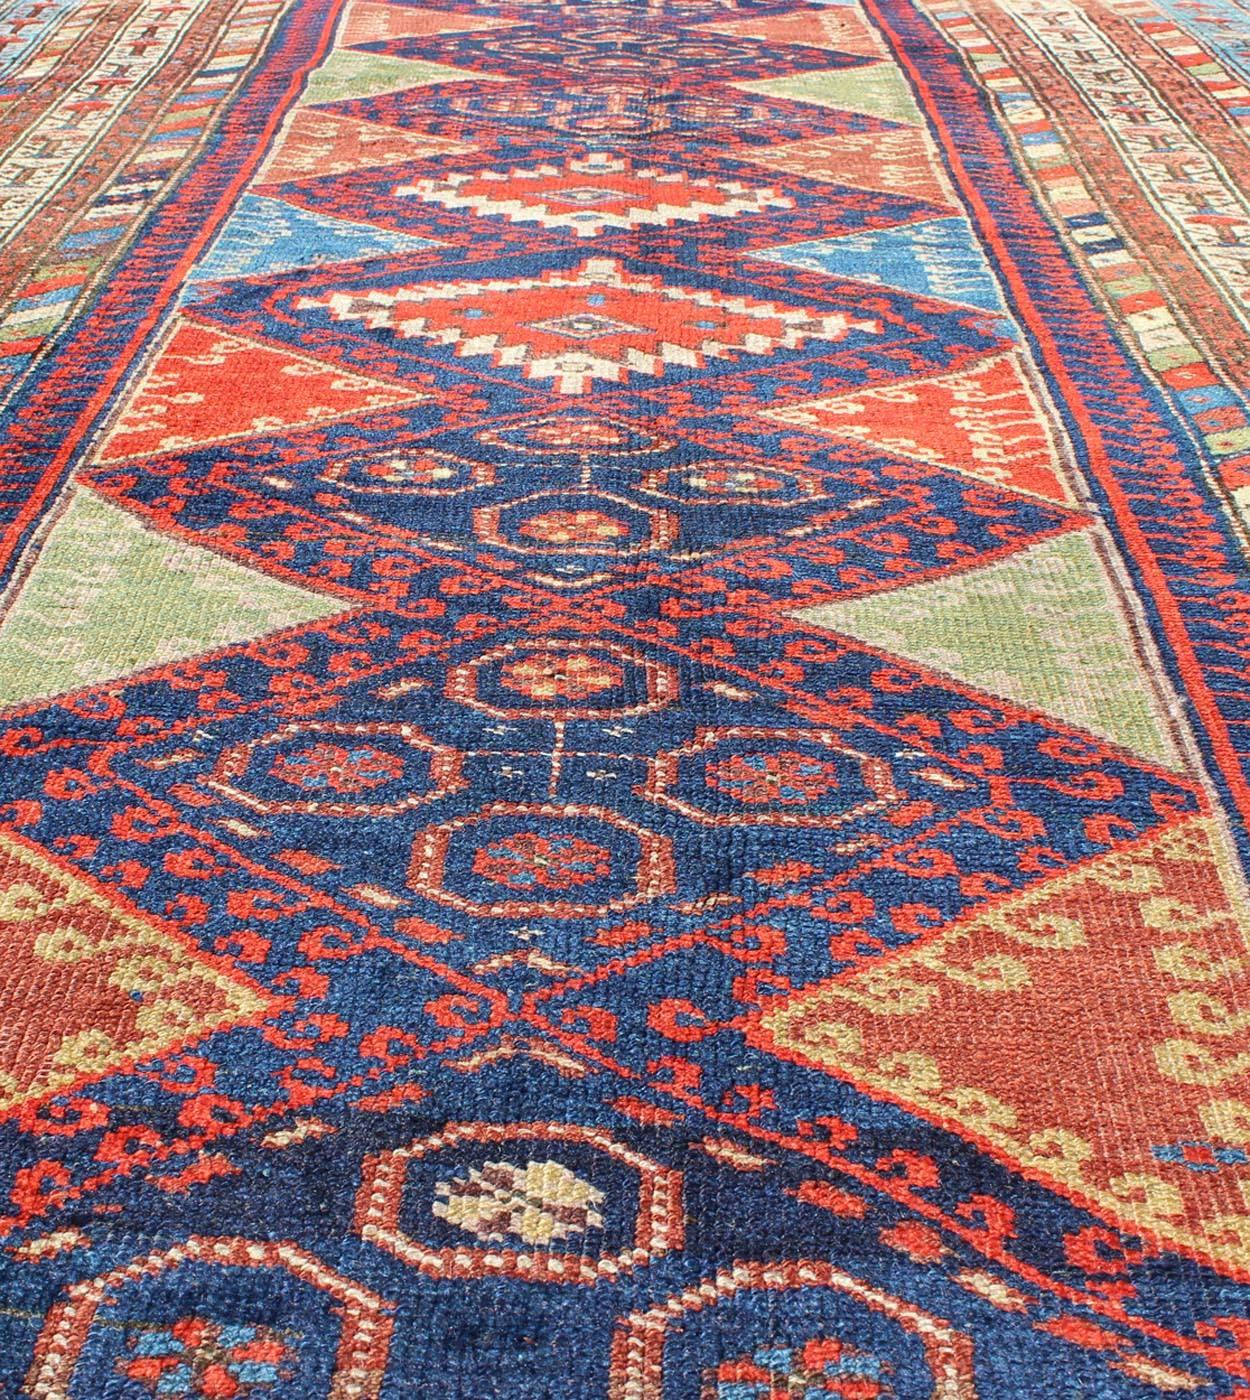 19th Century Antique Kurdish Kazak with Tribal and Geometric Motifs In Blue, red & Green For Sale